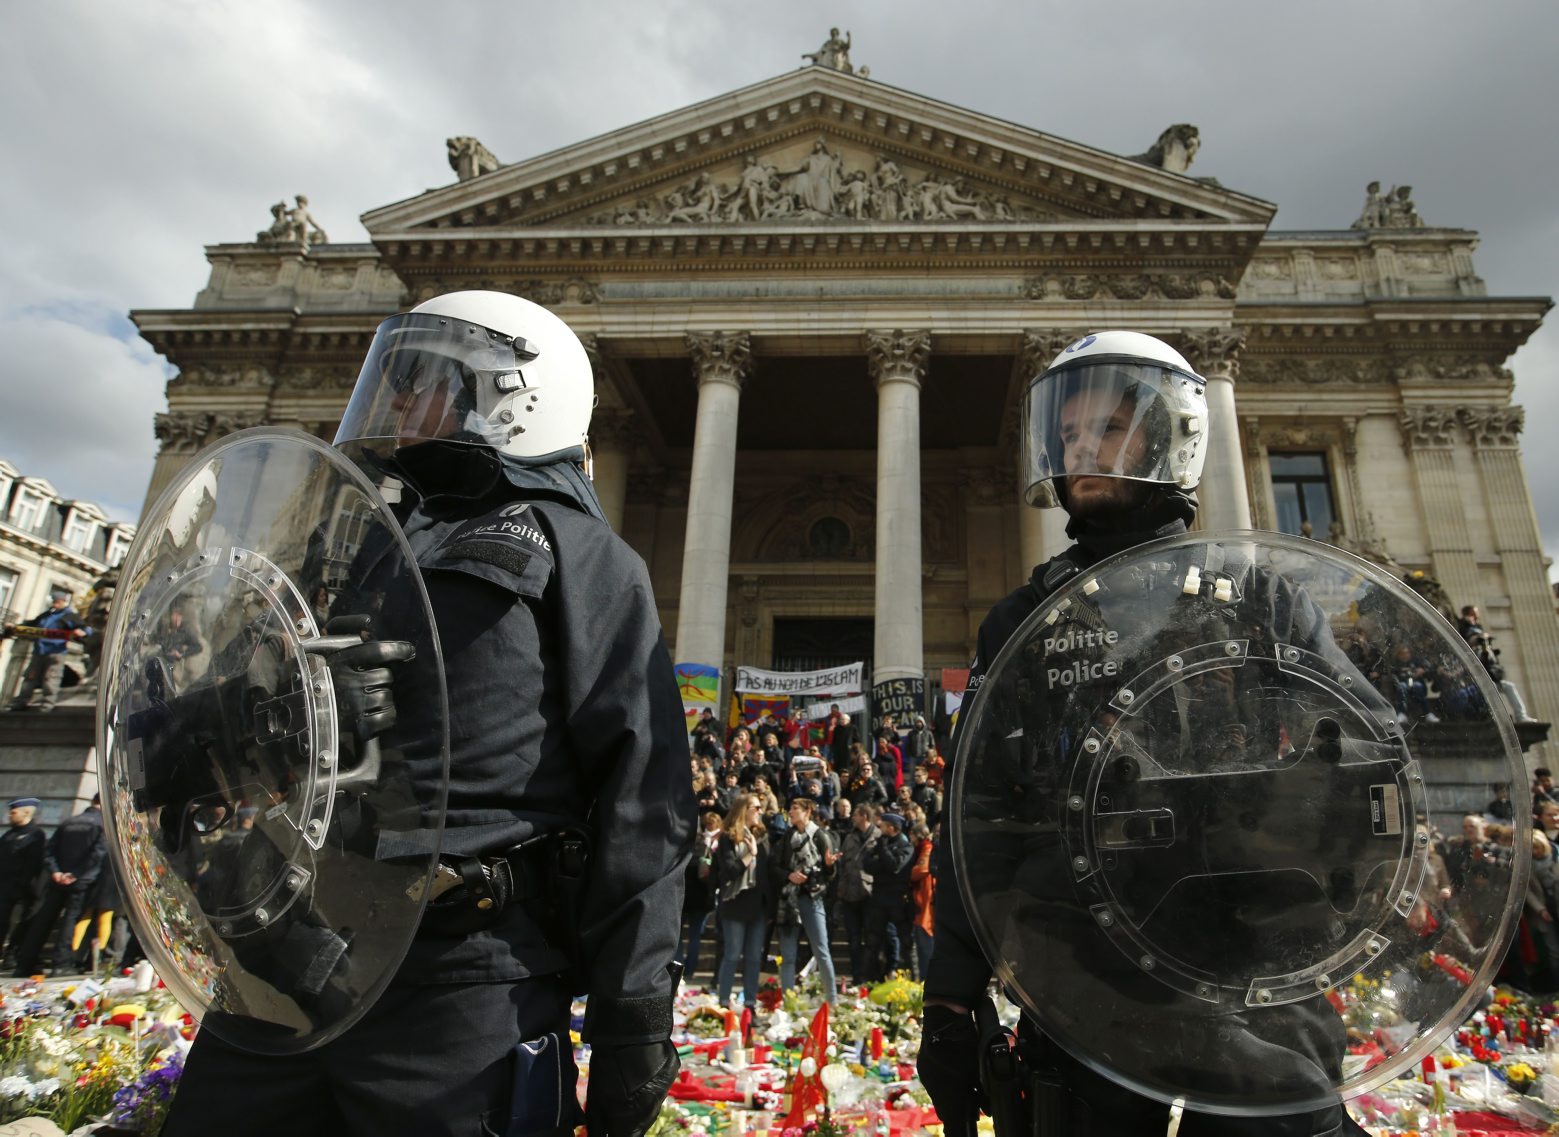 Police in riot gear protect one of the memorials to the victims of the recent Brussels attacks, as right wing demonstrators protest near the Place de la Bourse in Brussels, Sunday, March, 27, 2016. In a sign of the tensions in the Belgian capital and the way security services are stretched across the country, Belgium's interior minister appealed to residents not to march Sunday in Brussels in solidarity with the victims."We understand fully the emotions," Interior Minister Jan Jambon told reporters. "We understand that everyone wants to express these feelings."(AP Photo/Alastair Grant) BELGIUM ATTACKS